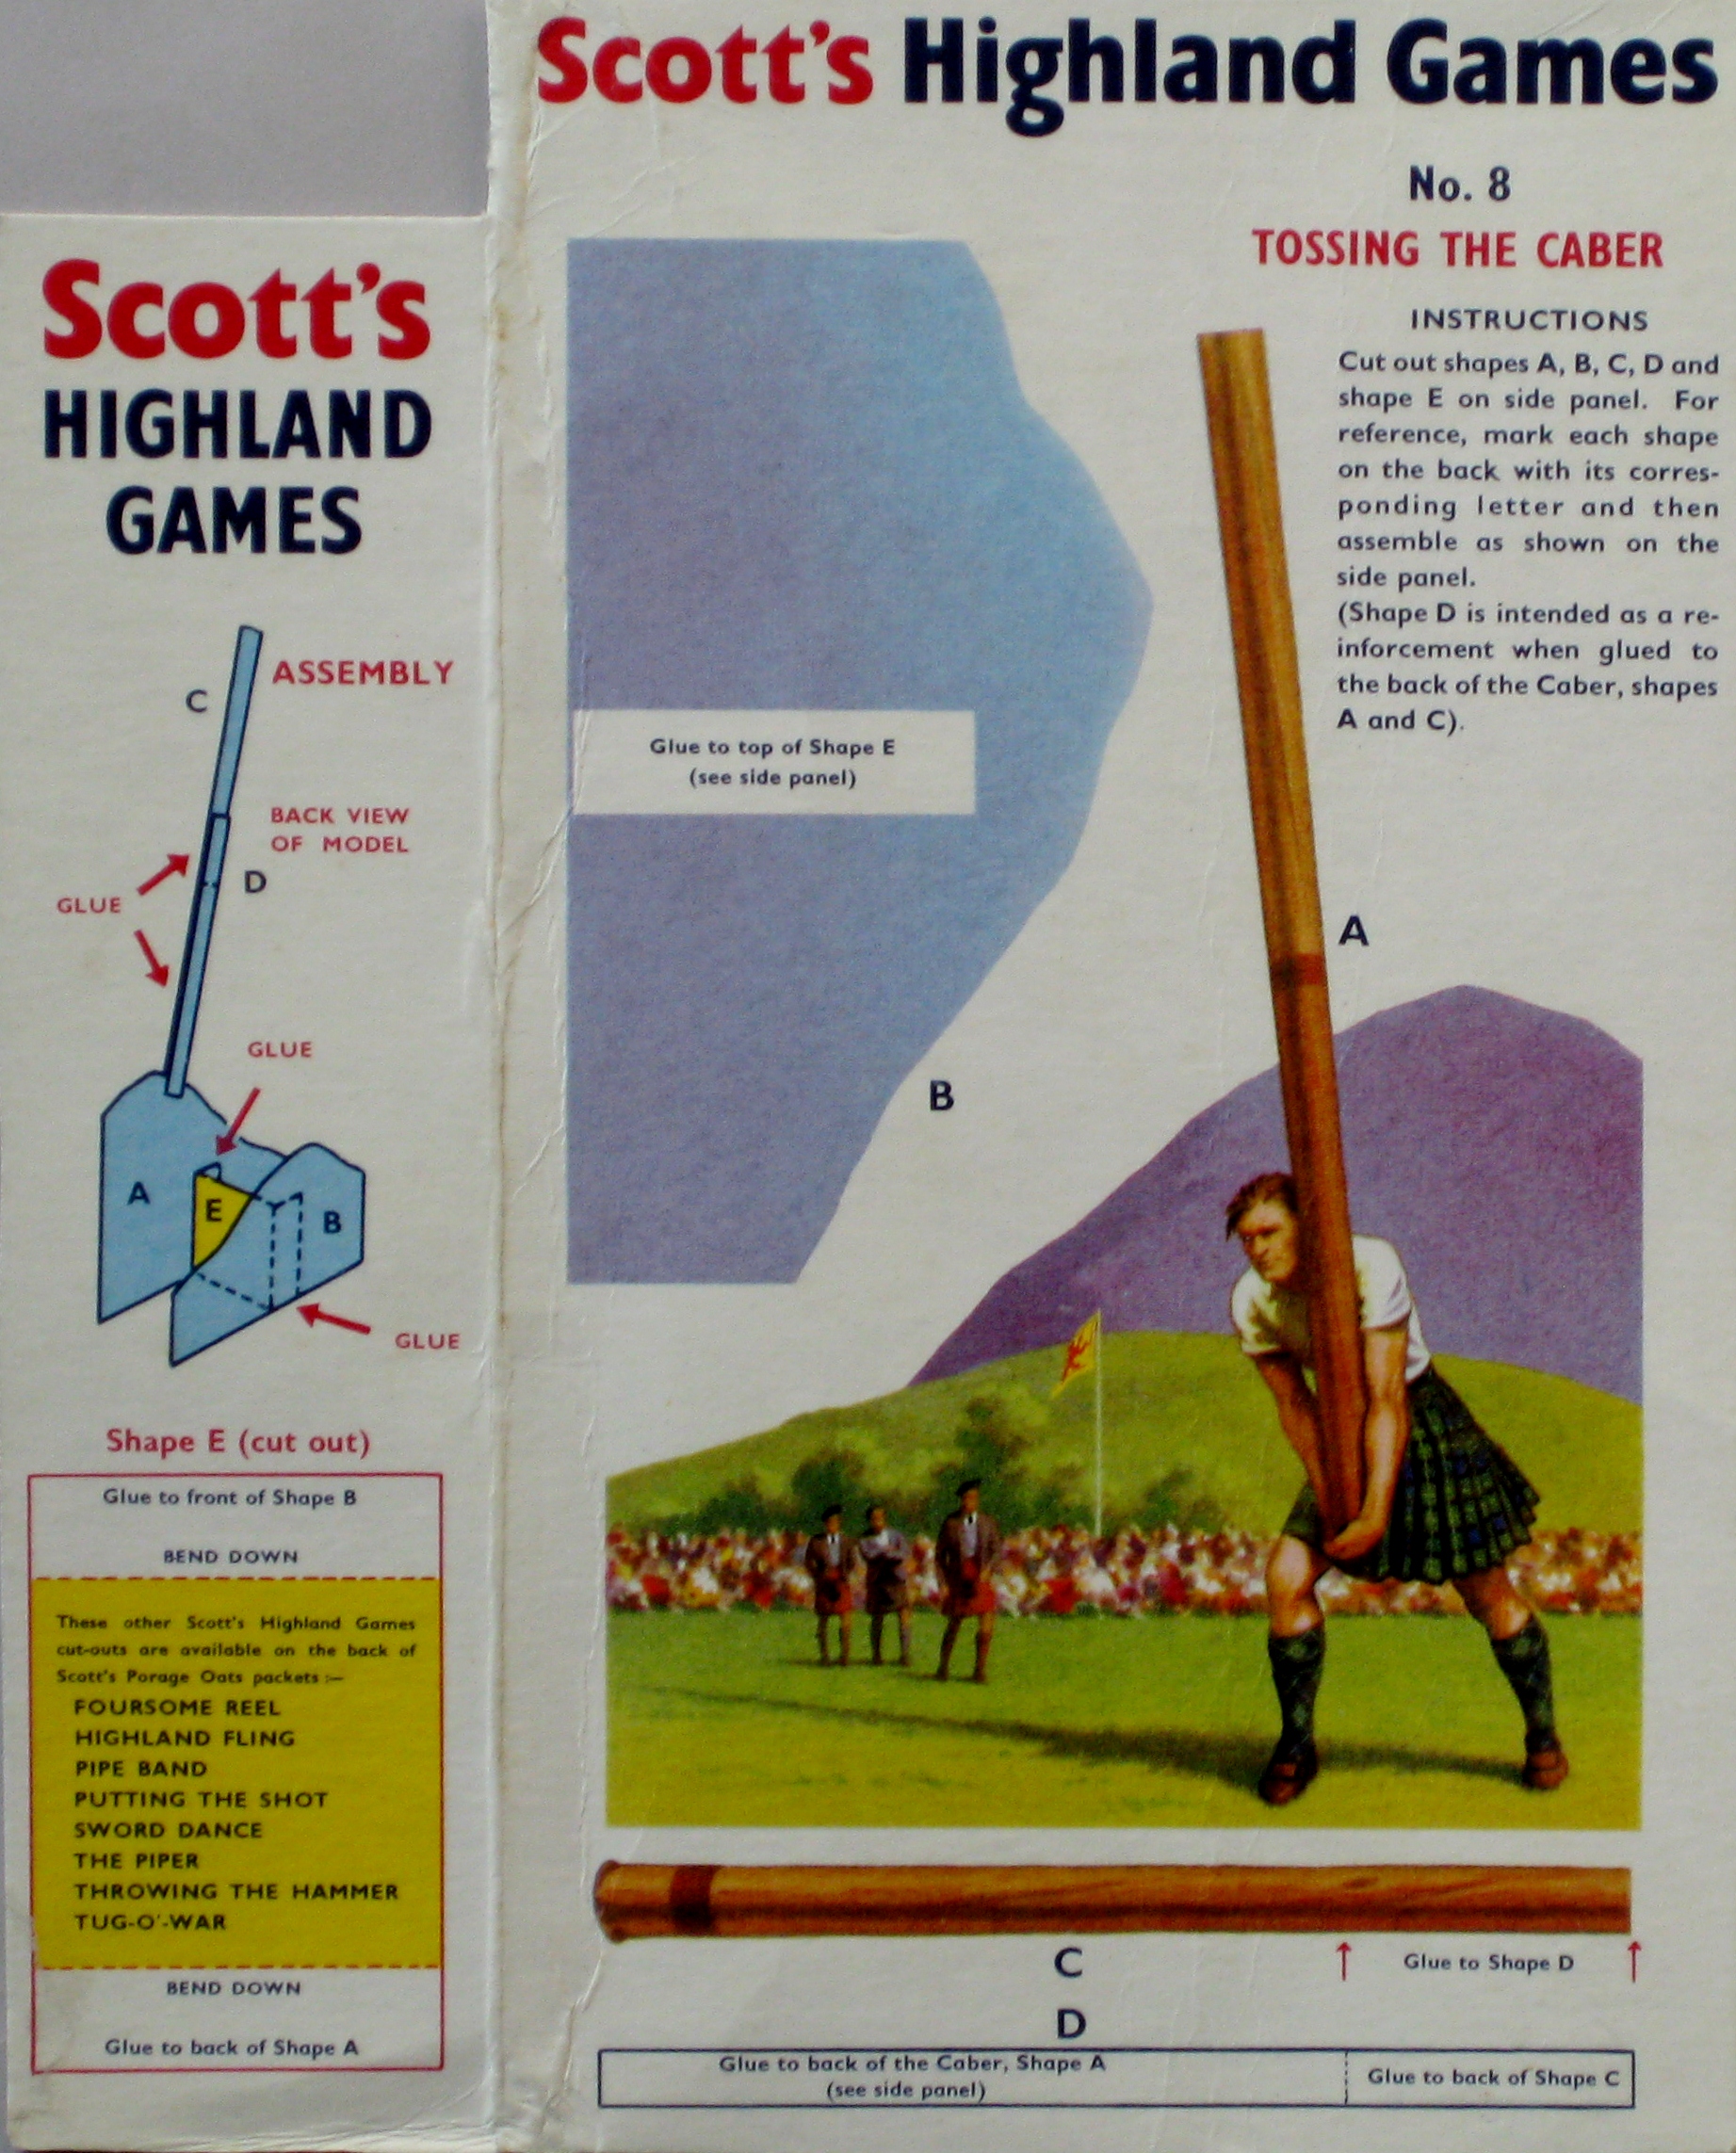 1950s Scotts Porage Highland Games Tosisng the Caber